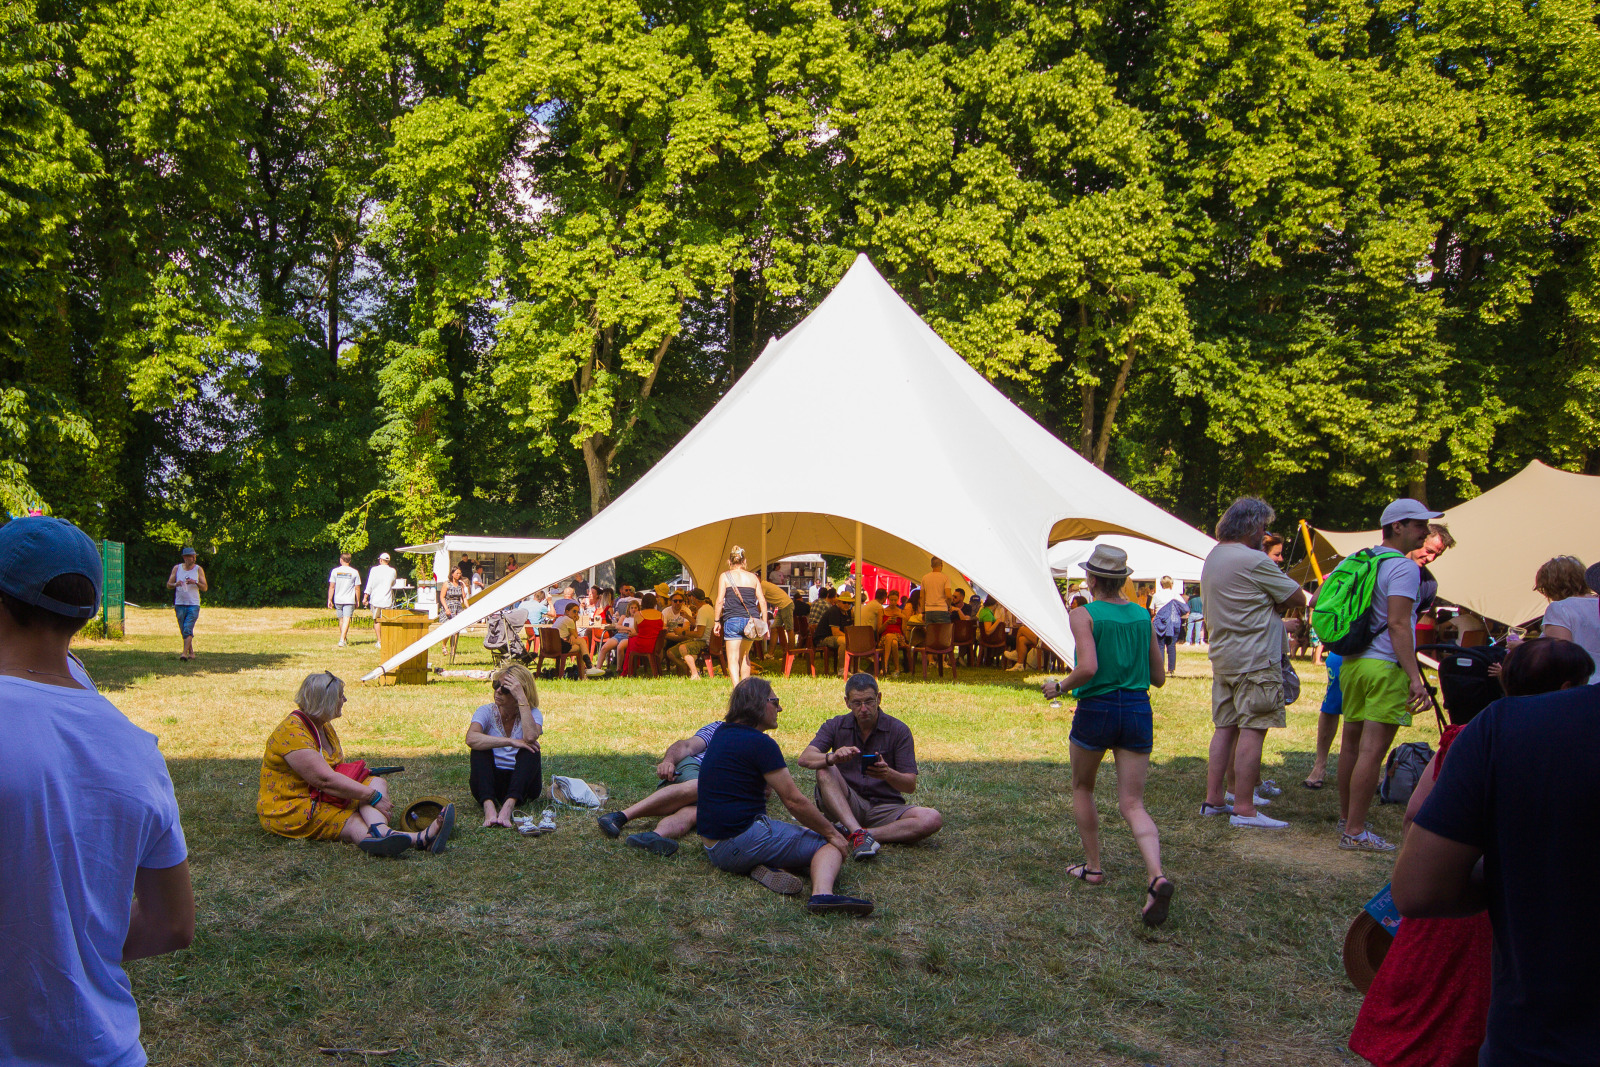 Tipi planted in the center of a meadow for the Tripel Beer Festival